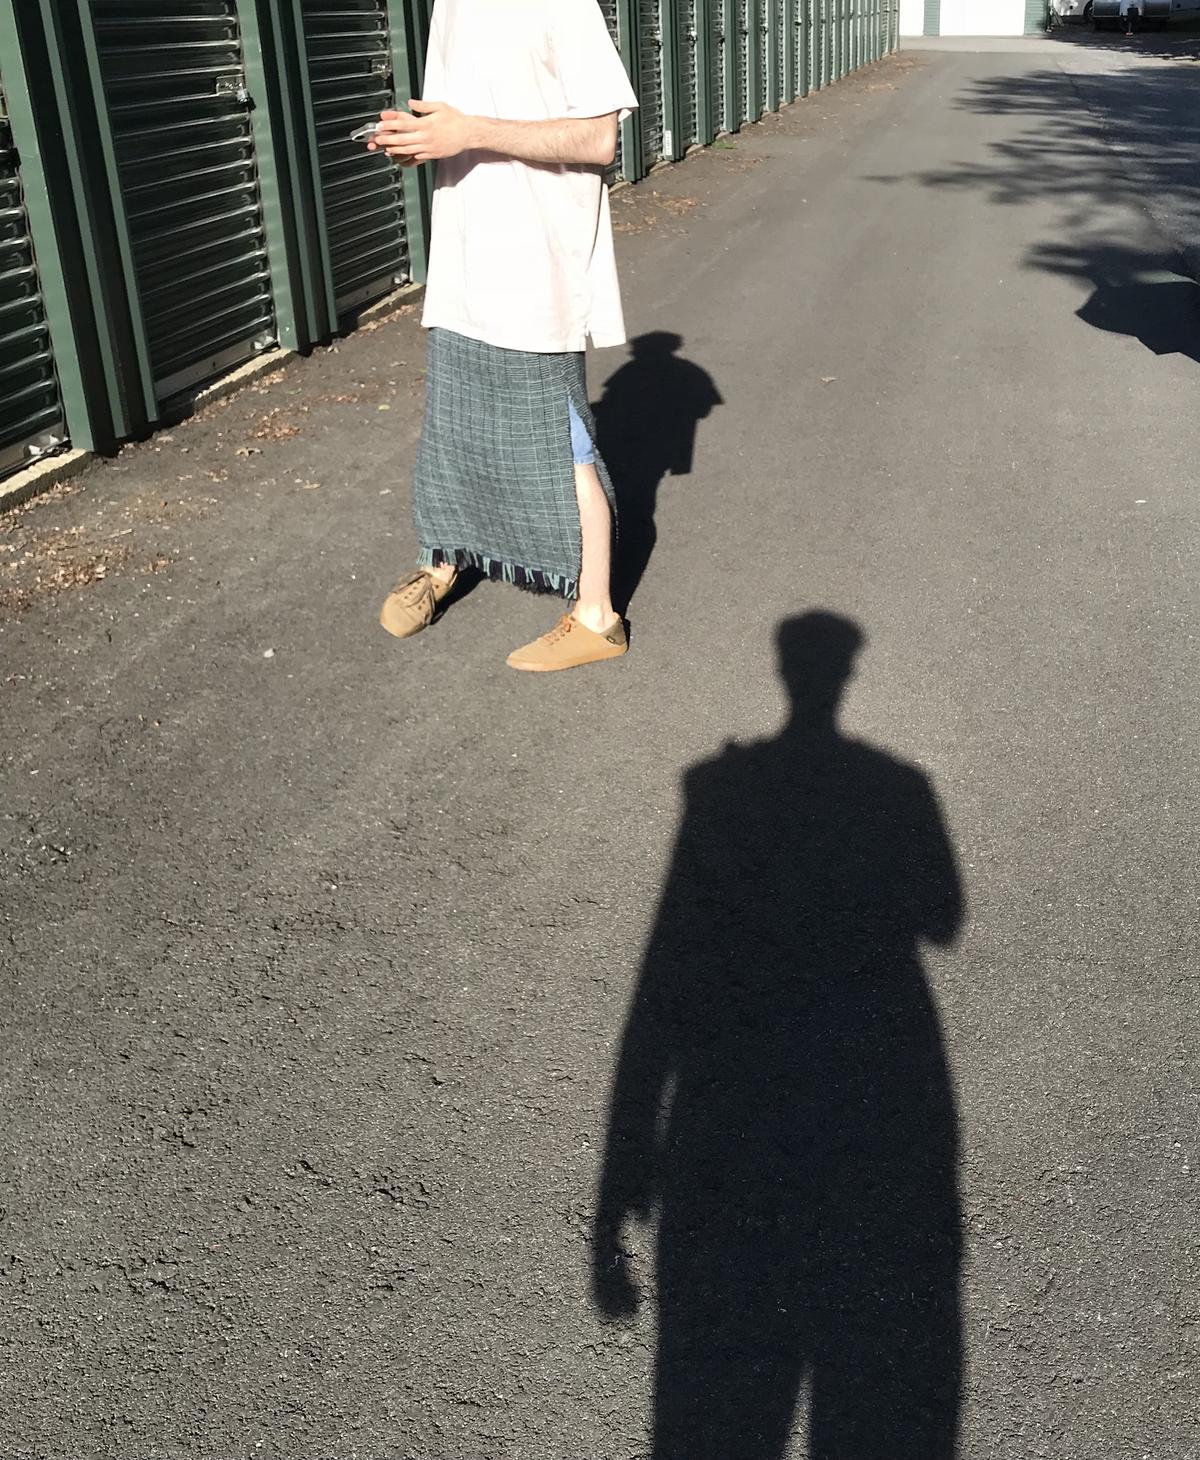 a cropped shot of the skirt being worn in front of a line of storage lockers. a side slit reveals a leg. the photographer's shadow is long on the pavement.